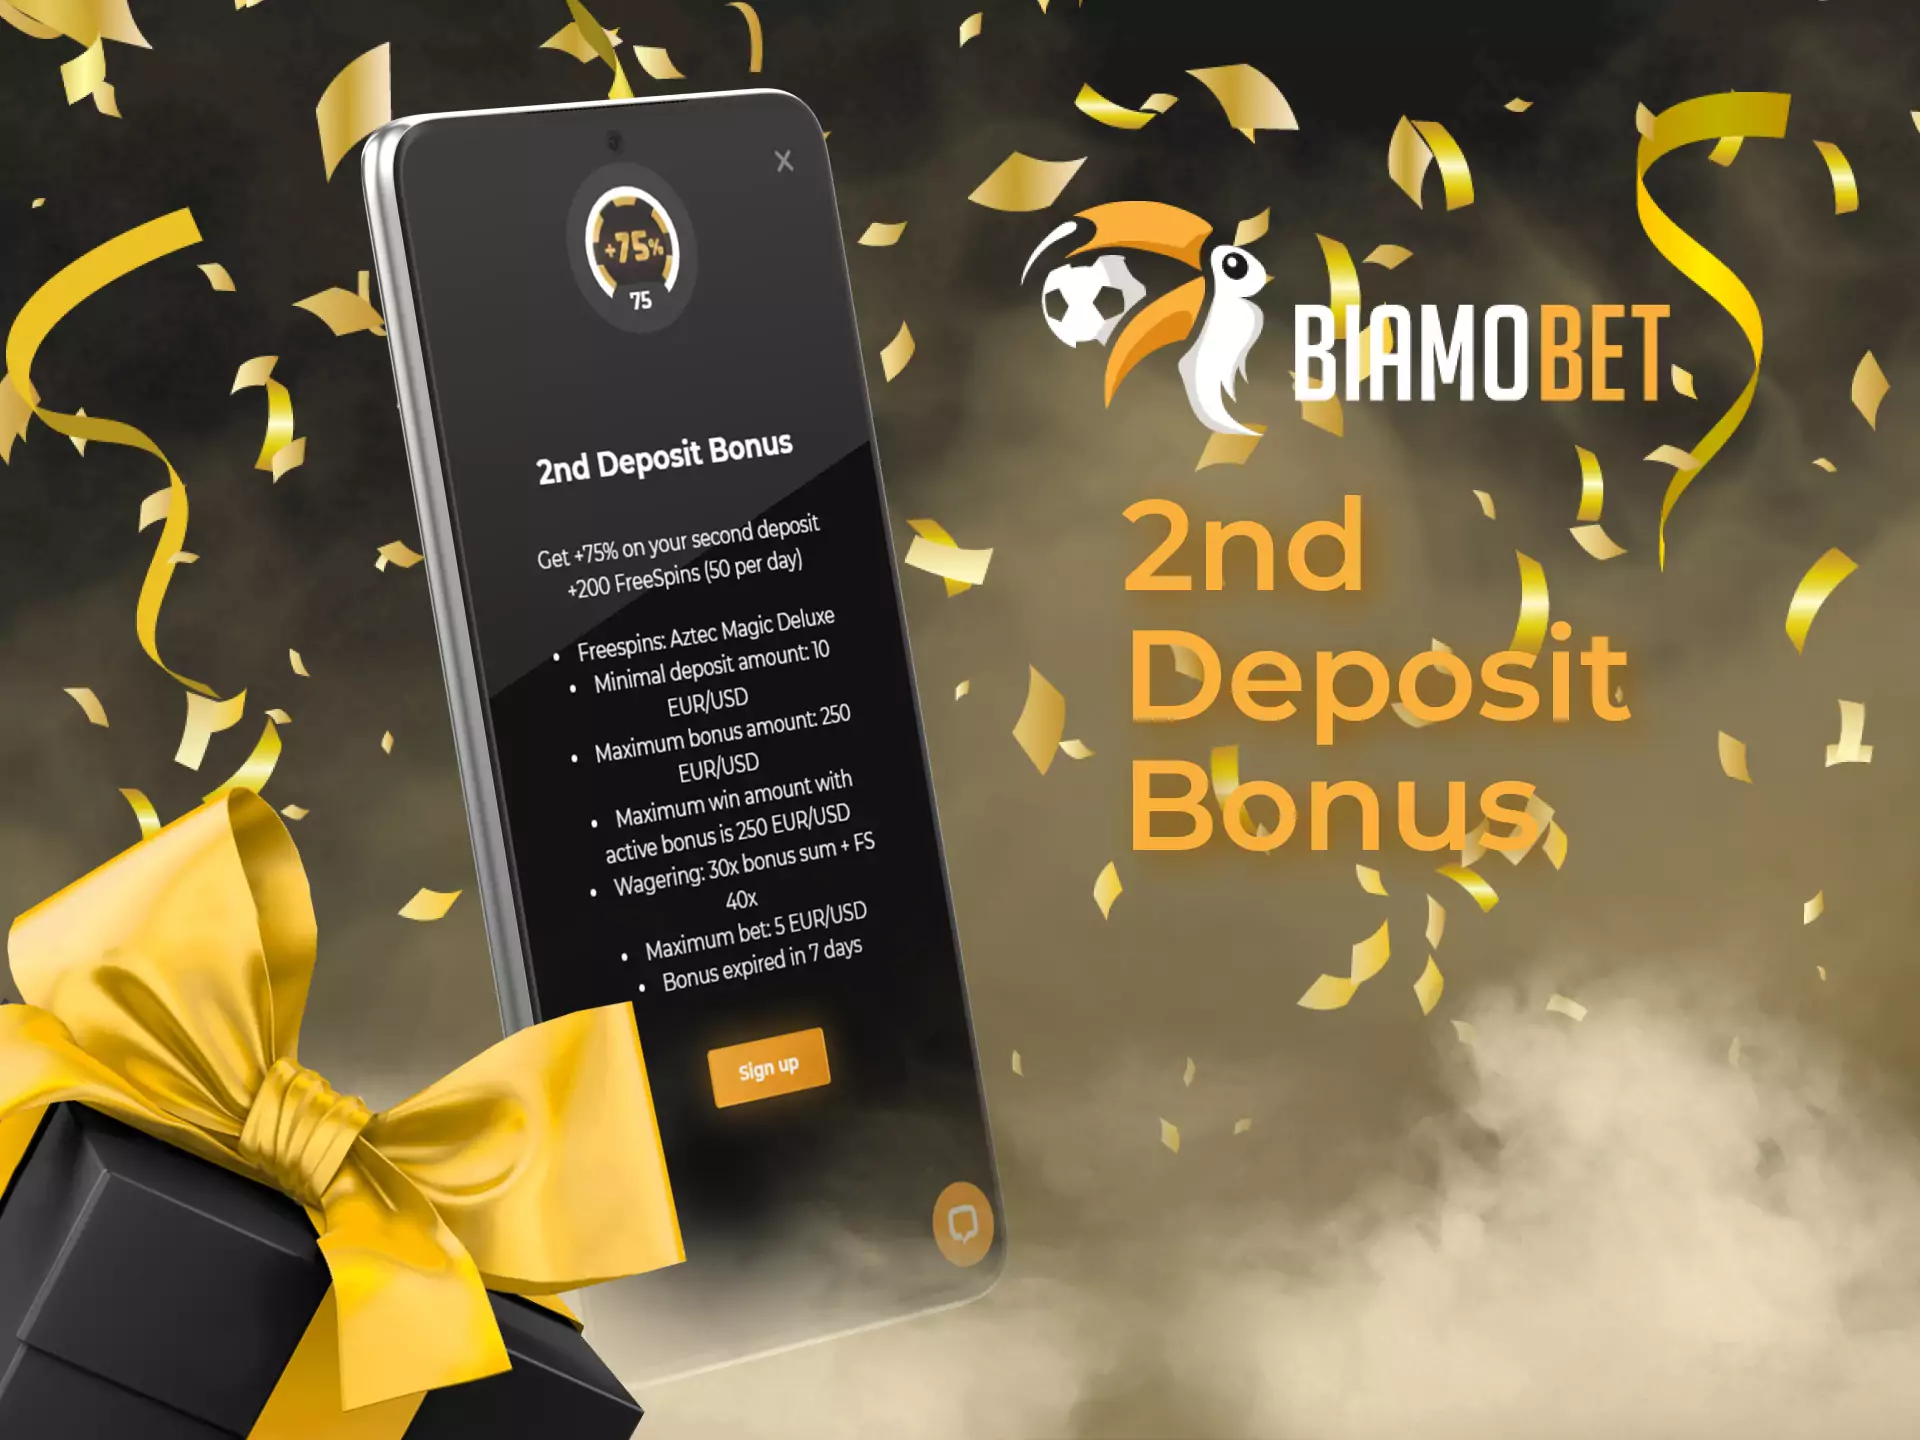 When you top up your account a second time, you can claim a bonus from Biamobet.